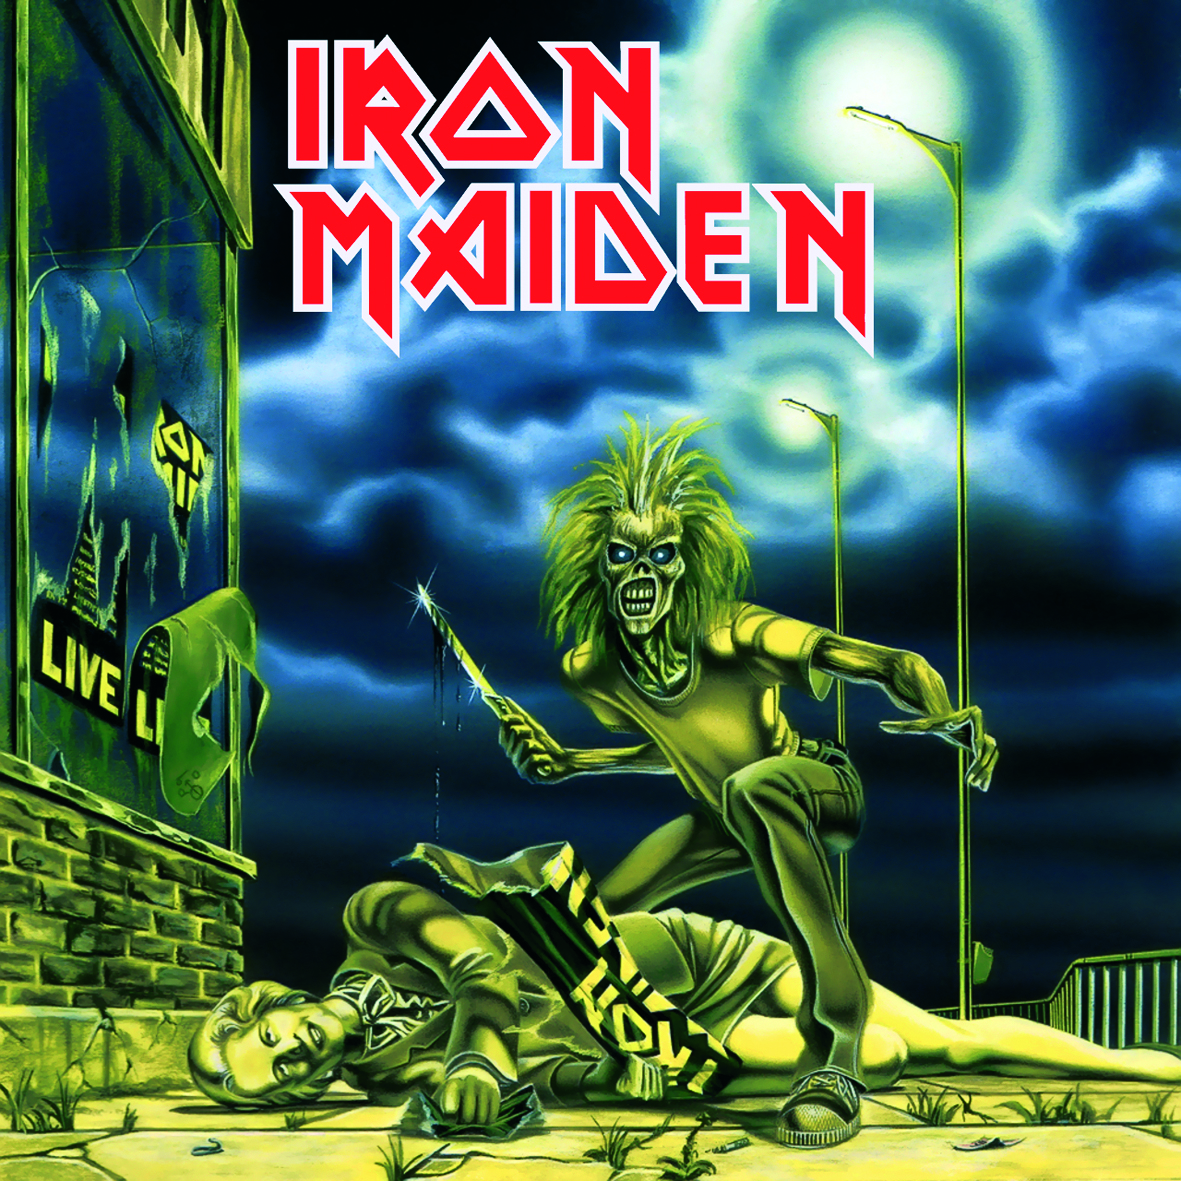 Cover Story: IRON MAIDEN